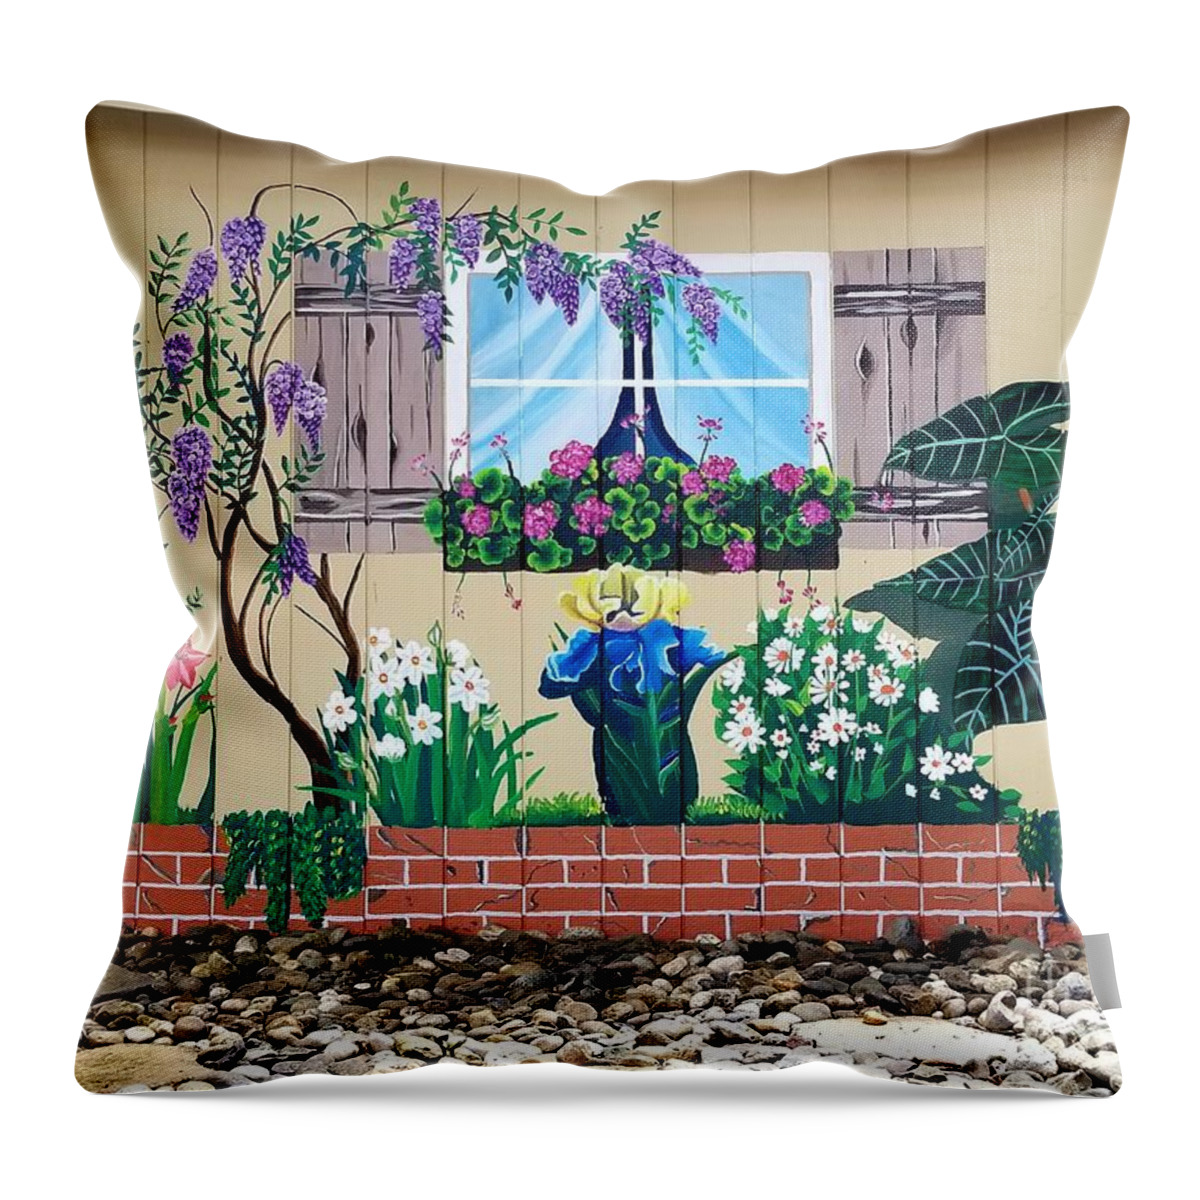 Mural Throw Pillow featuring the digital art Happy All Year Long by Yenni Harrison